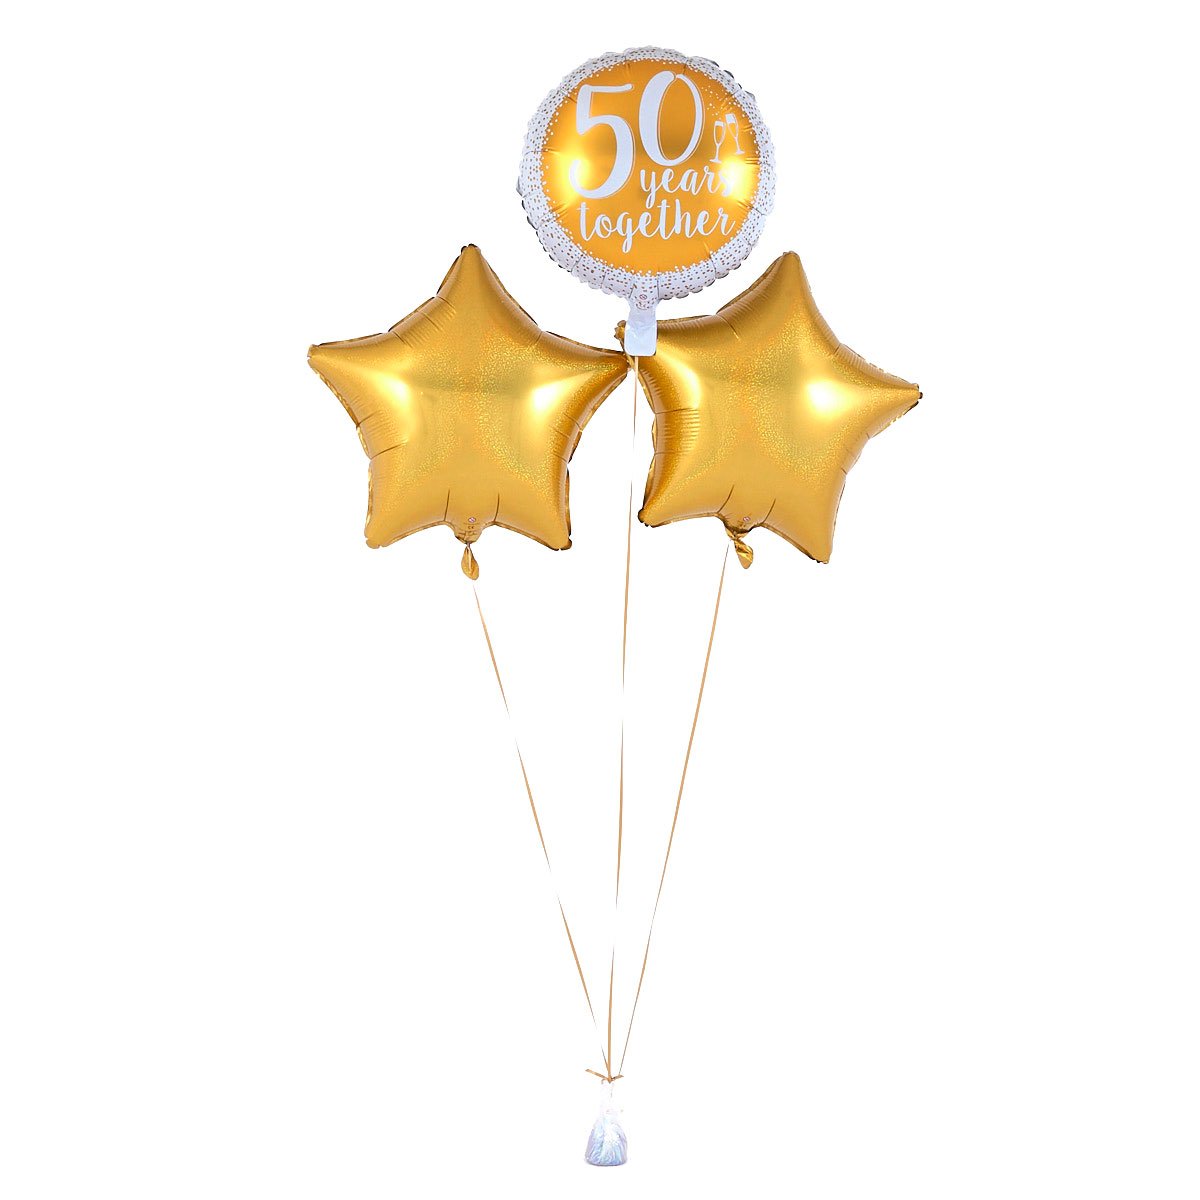 50 Years Together' Golden Wedding Balloon Bouquet - DELIVERED INFLATED!